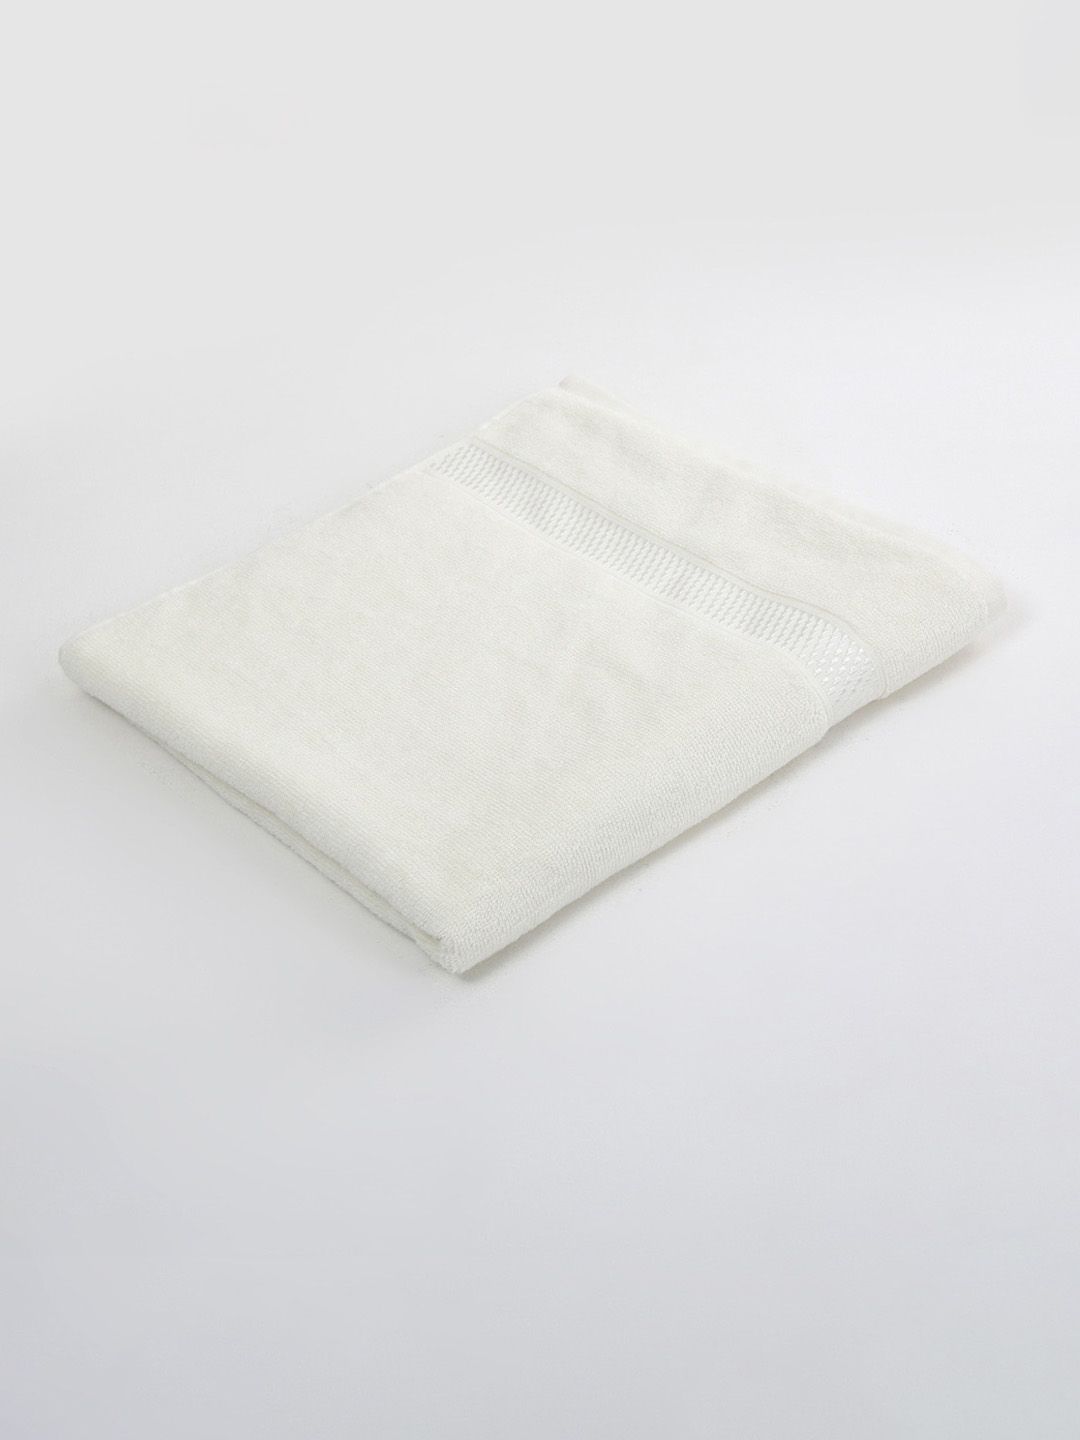 Home Centre White Solid 450 GSM Cotton Bath Towel Price in India